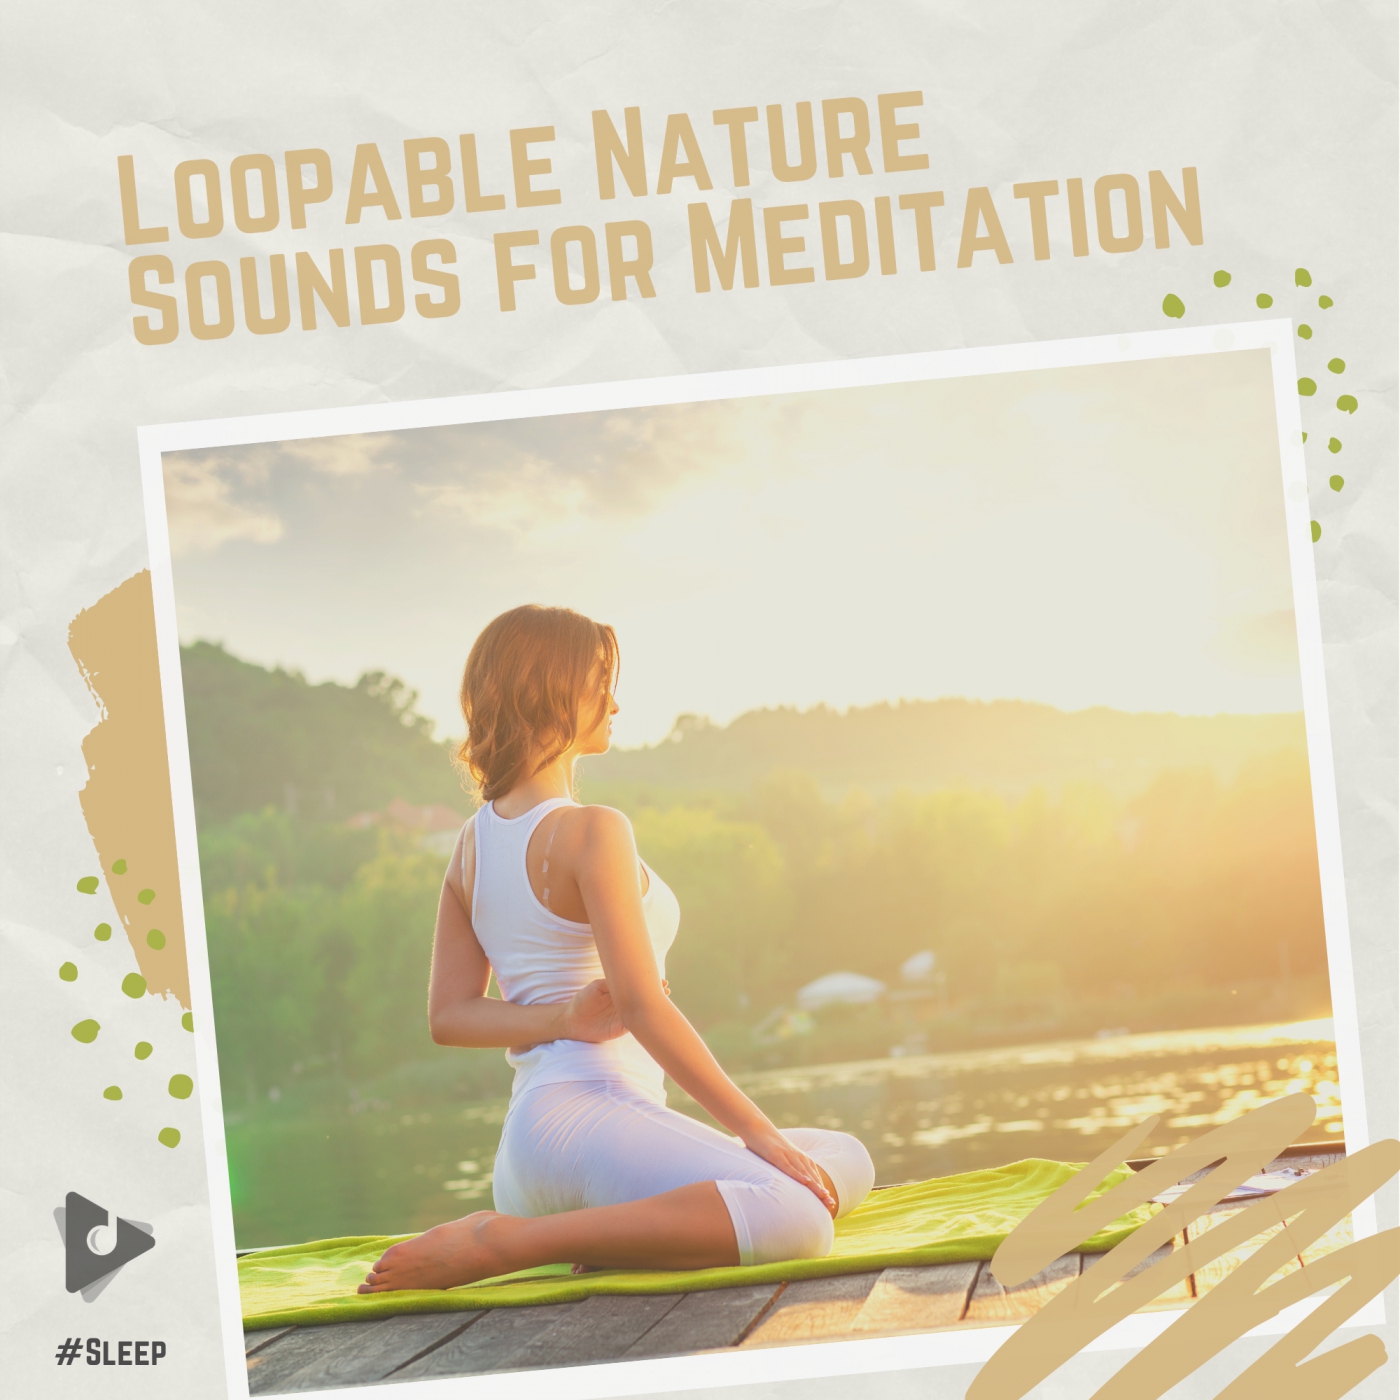 Loopable Nature Sounds for Meditation